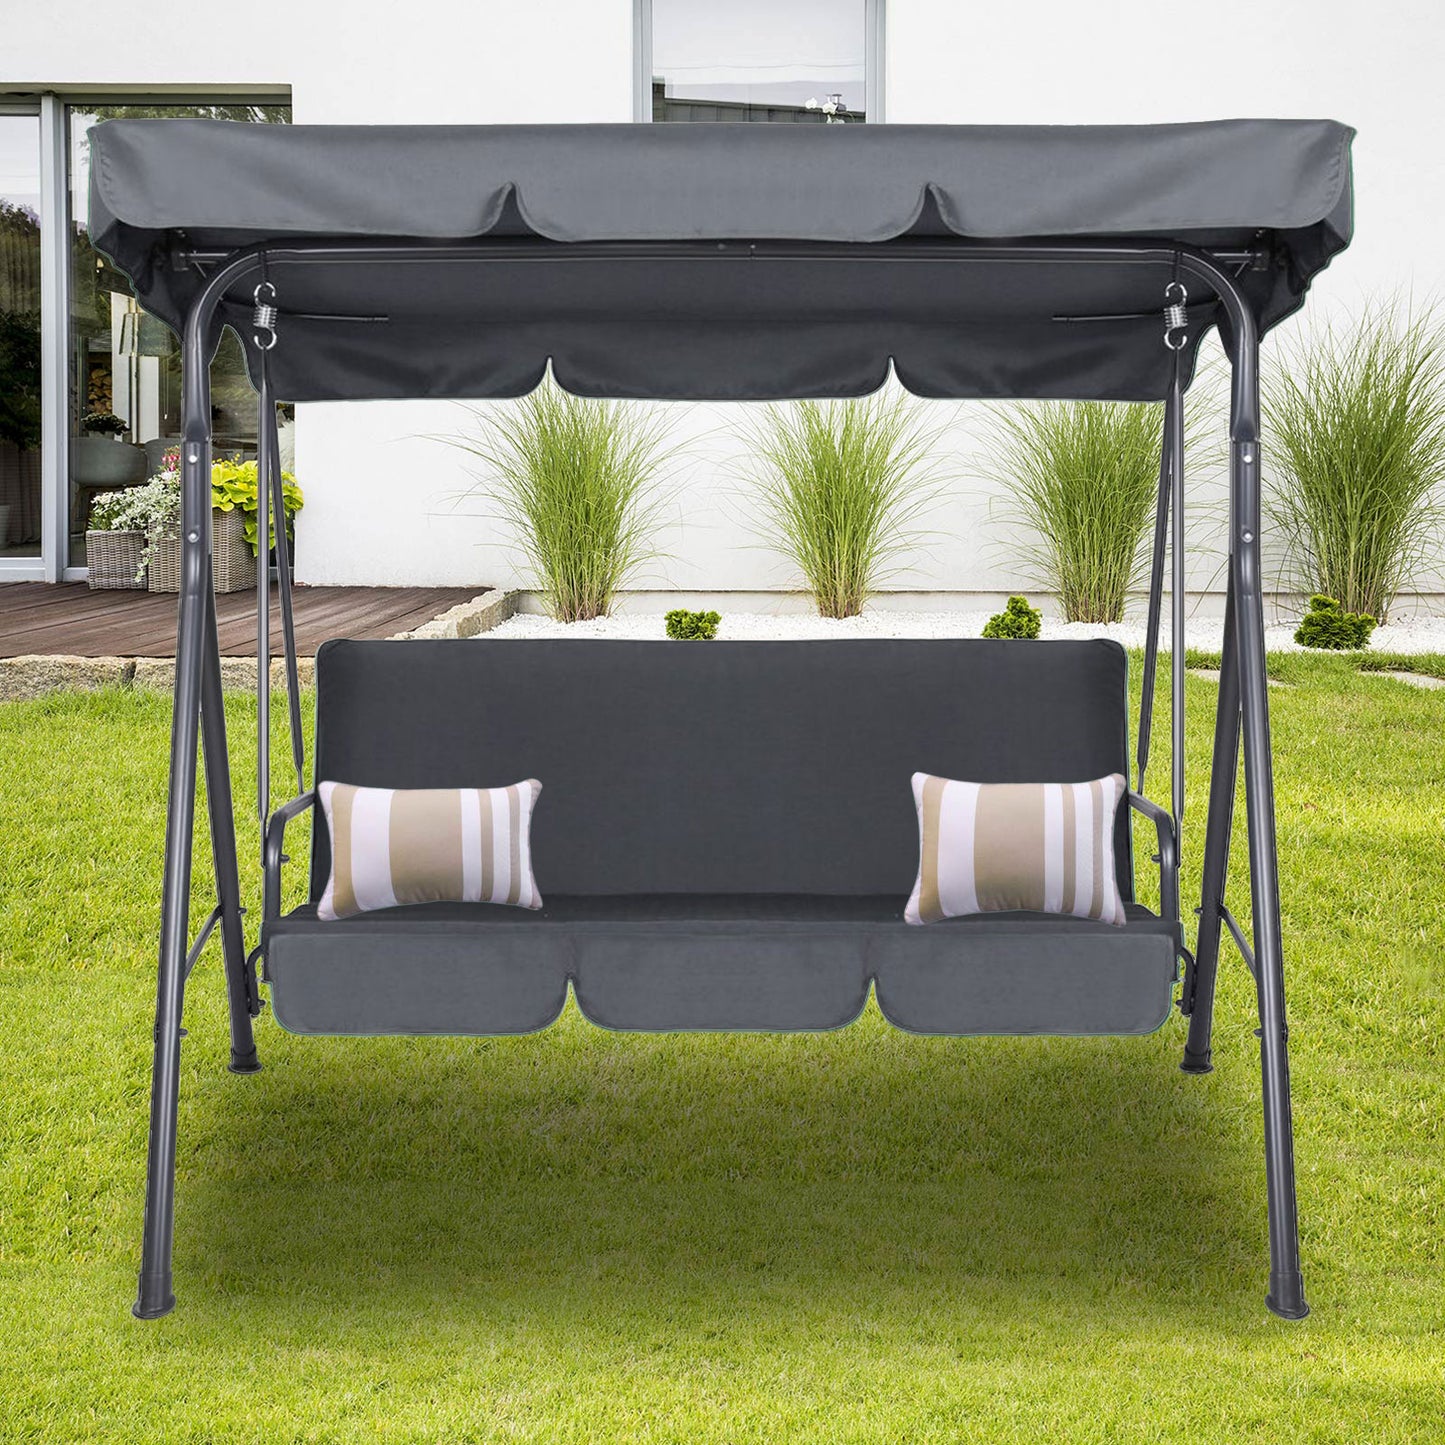 Milano Outdoor Swing Bench Seat Chair Canopy Furniture 3 Seater Garden Hammock - Grey - image2